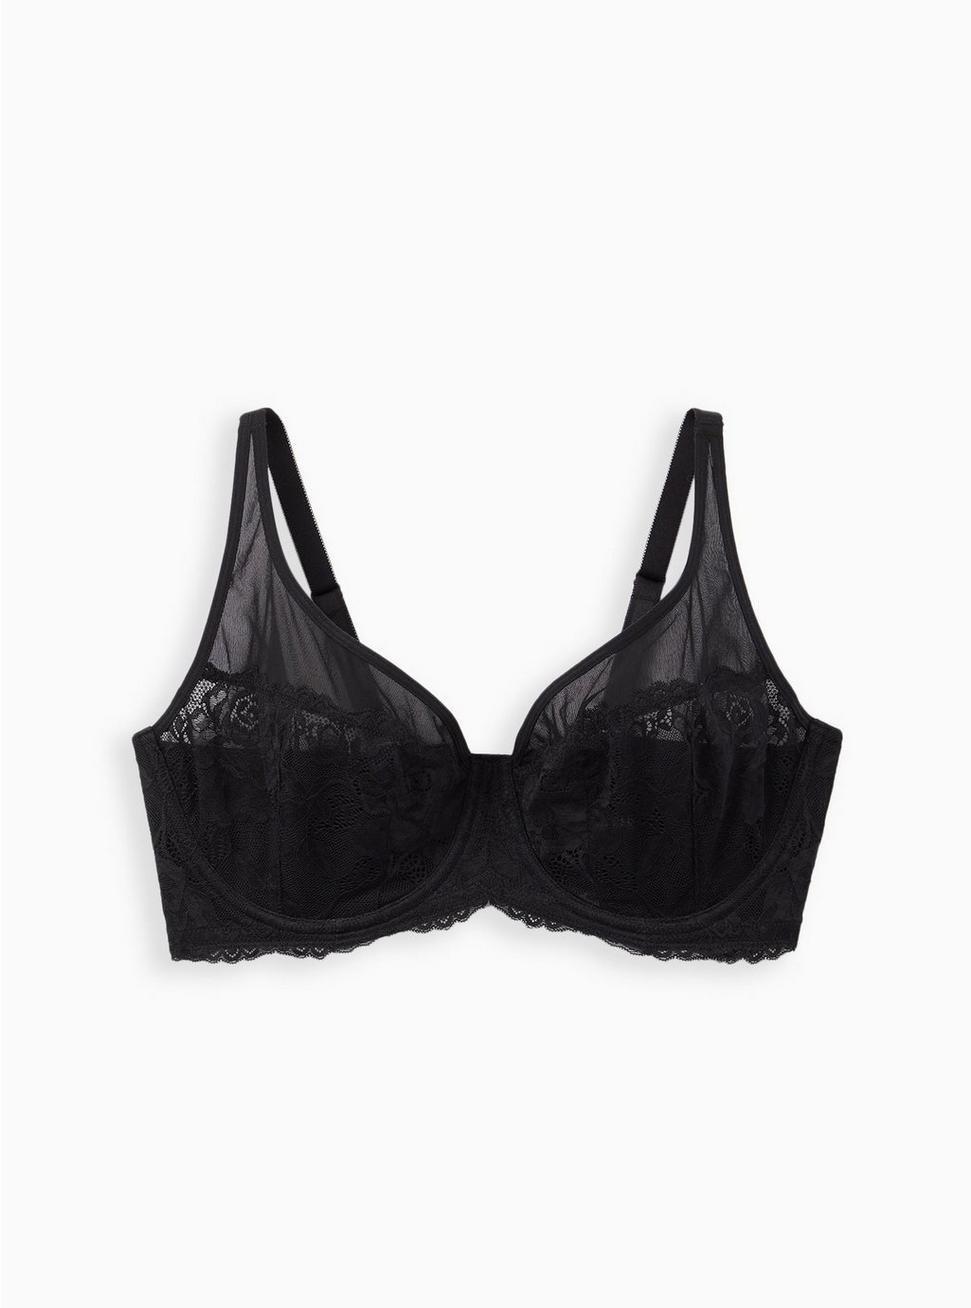 Balconette Unlined Lace And Mesh Straight Back Bra, RICH BLACK, hi-res